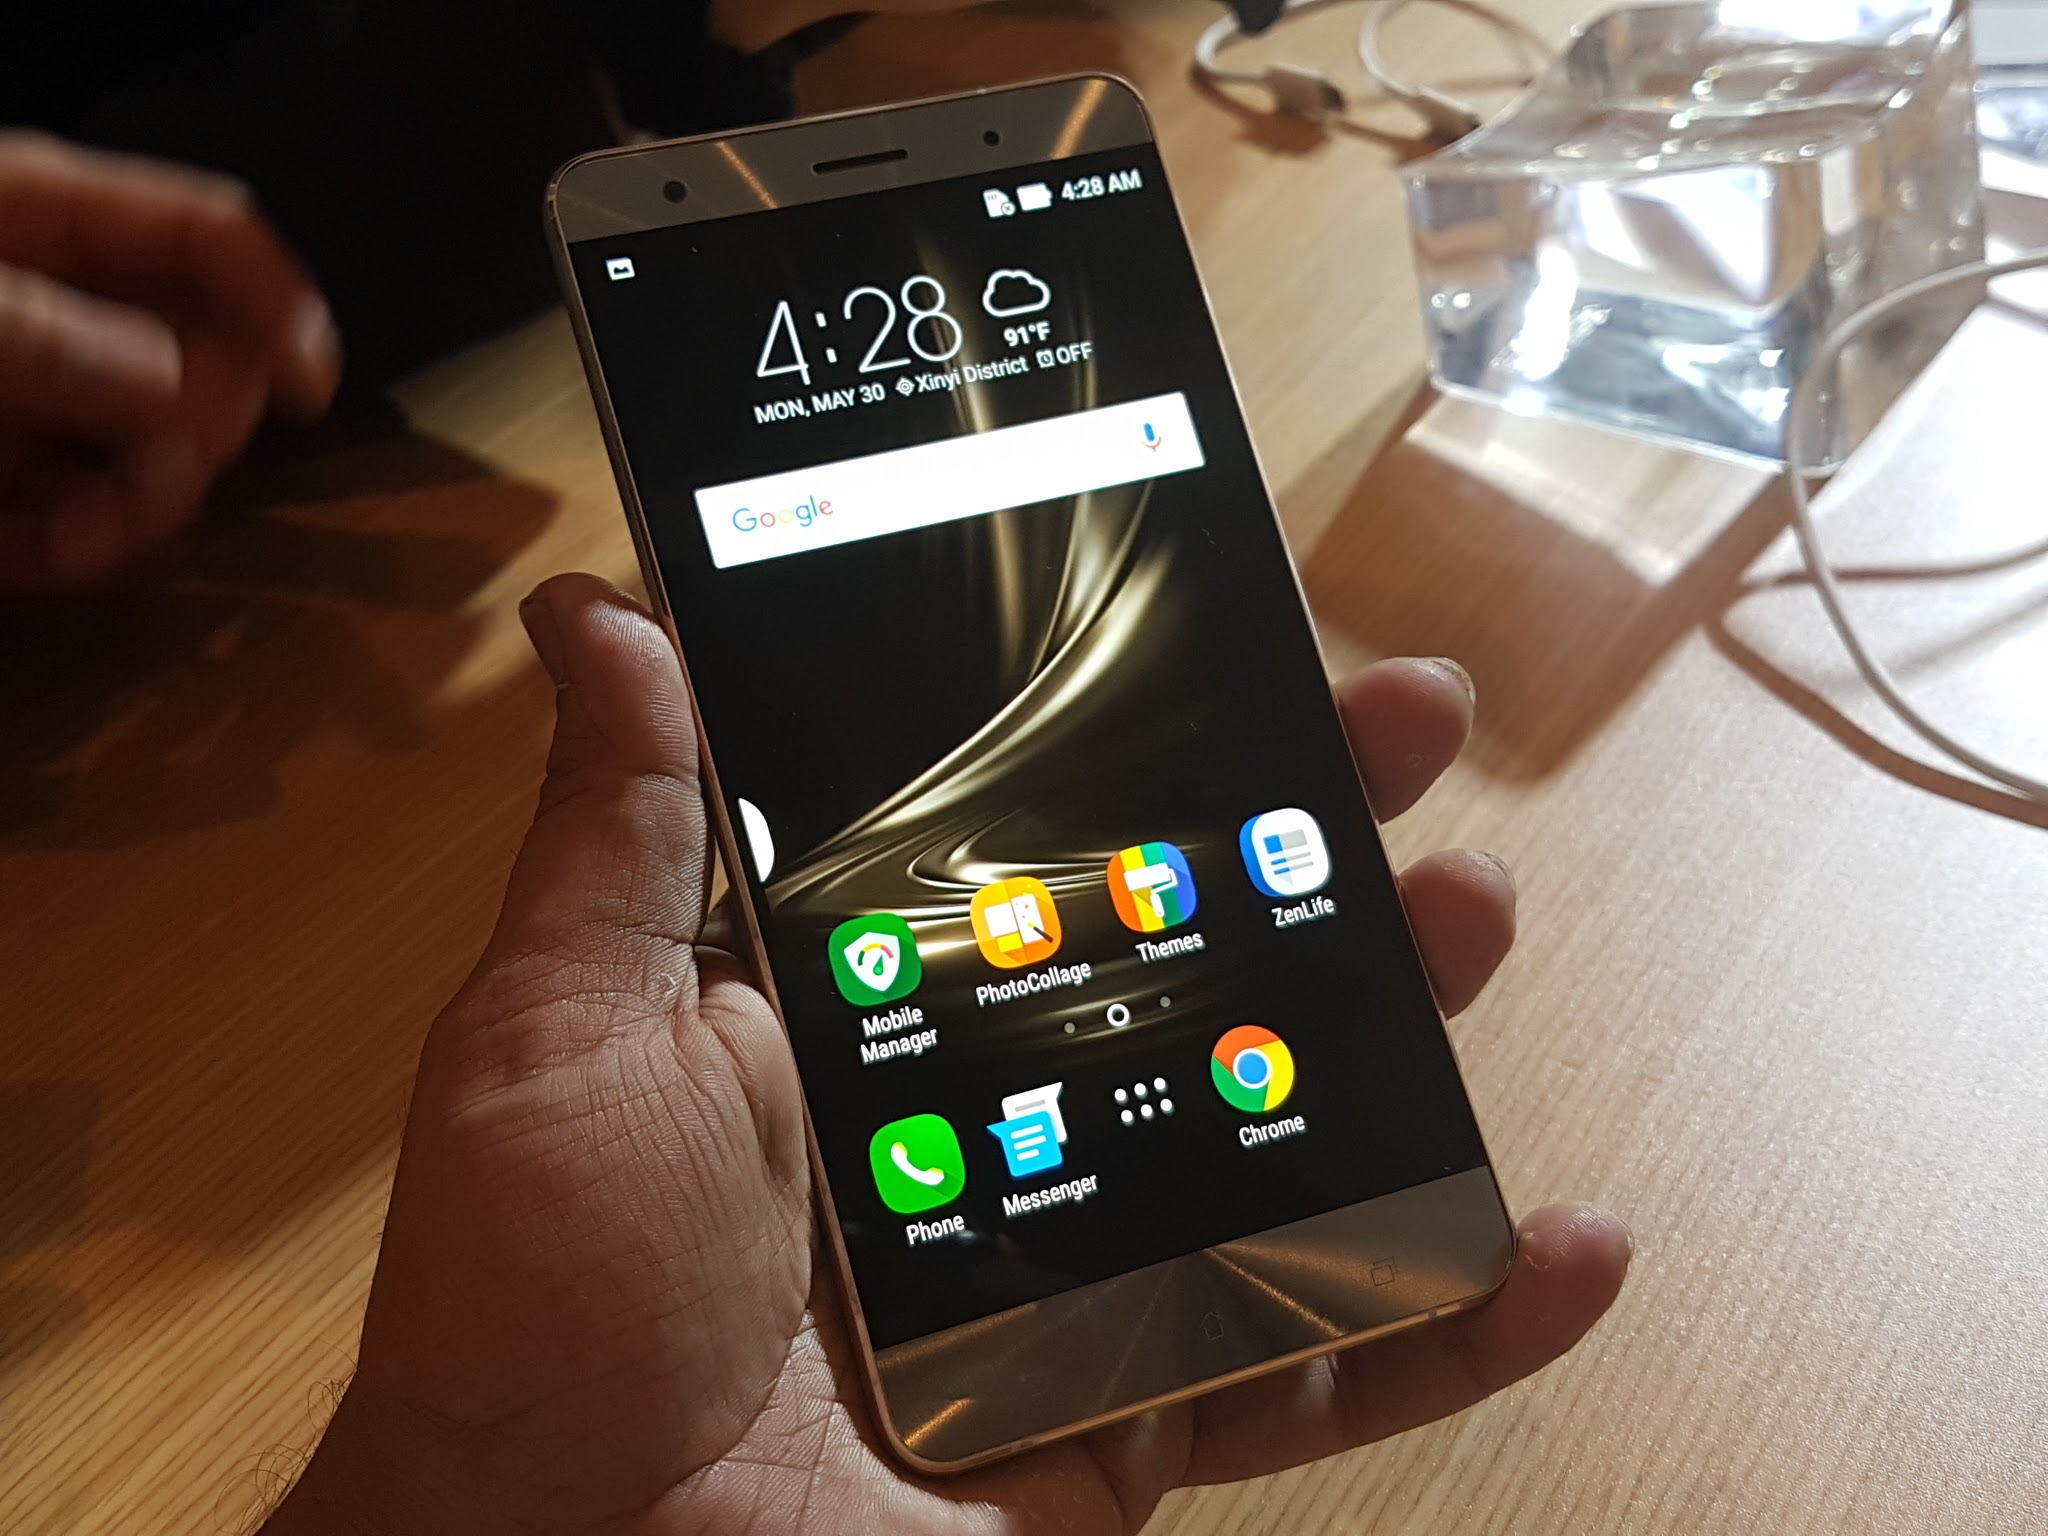 ASUS Zenfone 3 Deluxe Hands On, Specifications And Photo Gallery